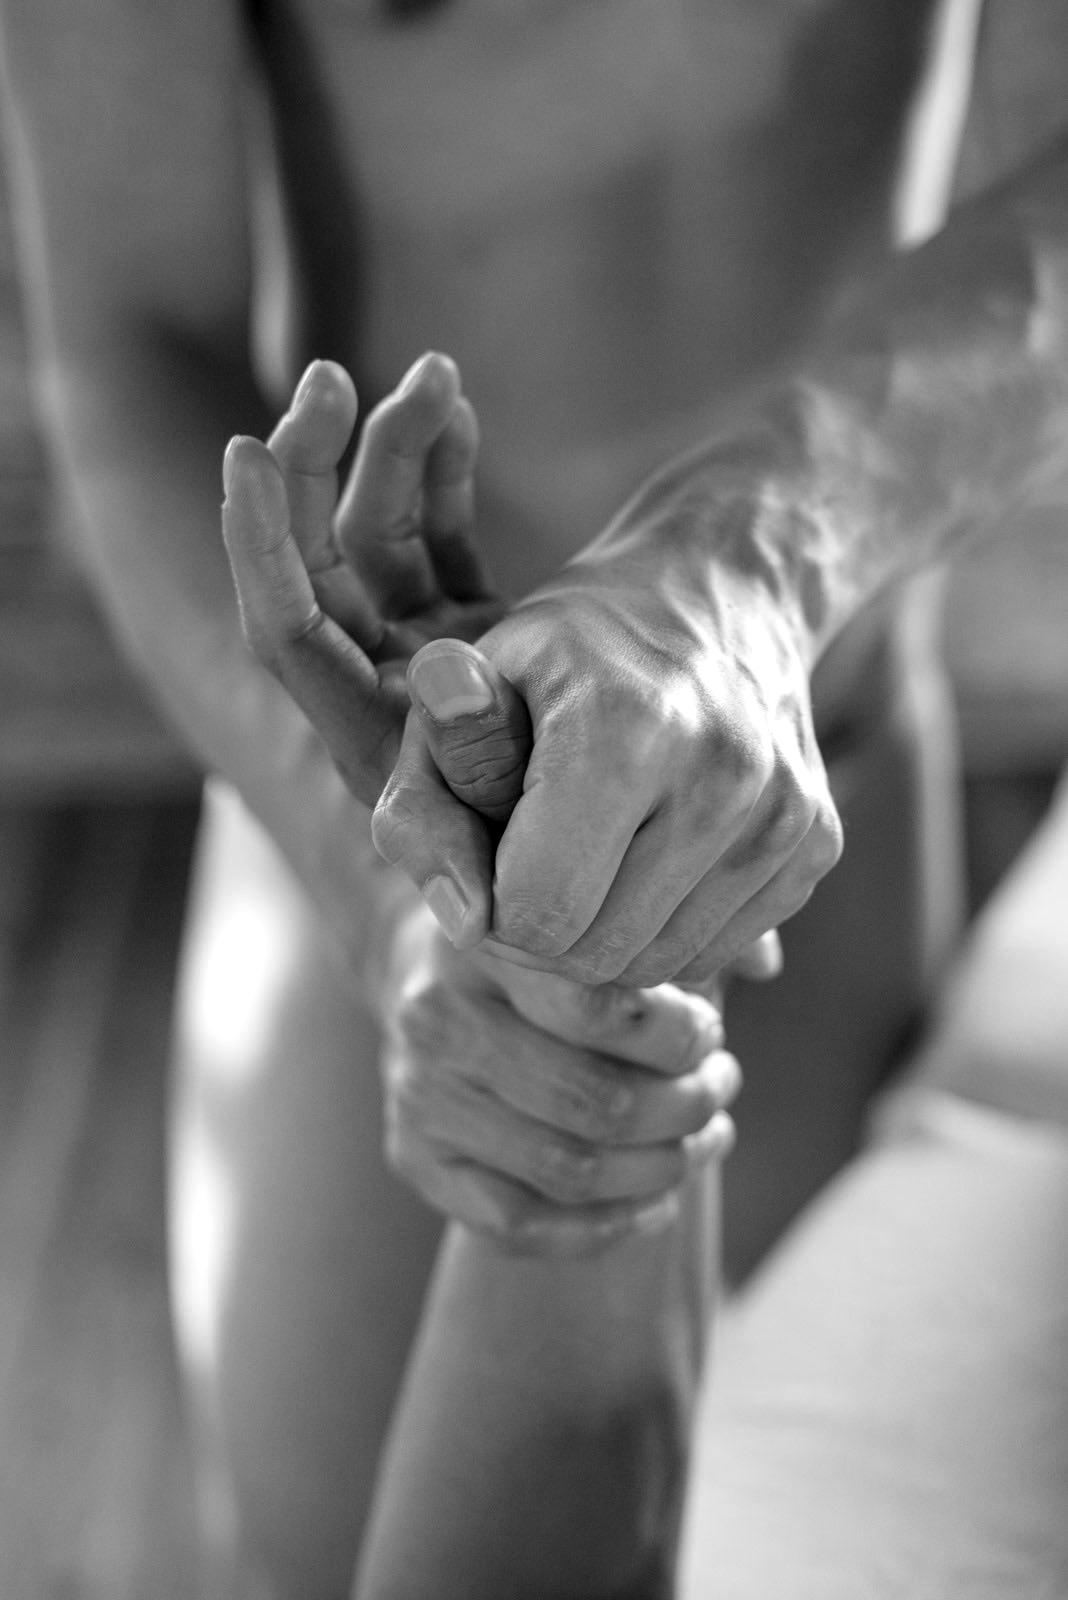 HandS, by Anders Cullen Photography.